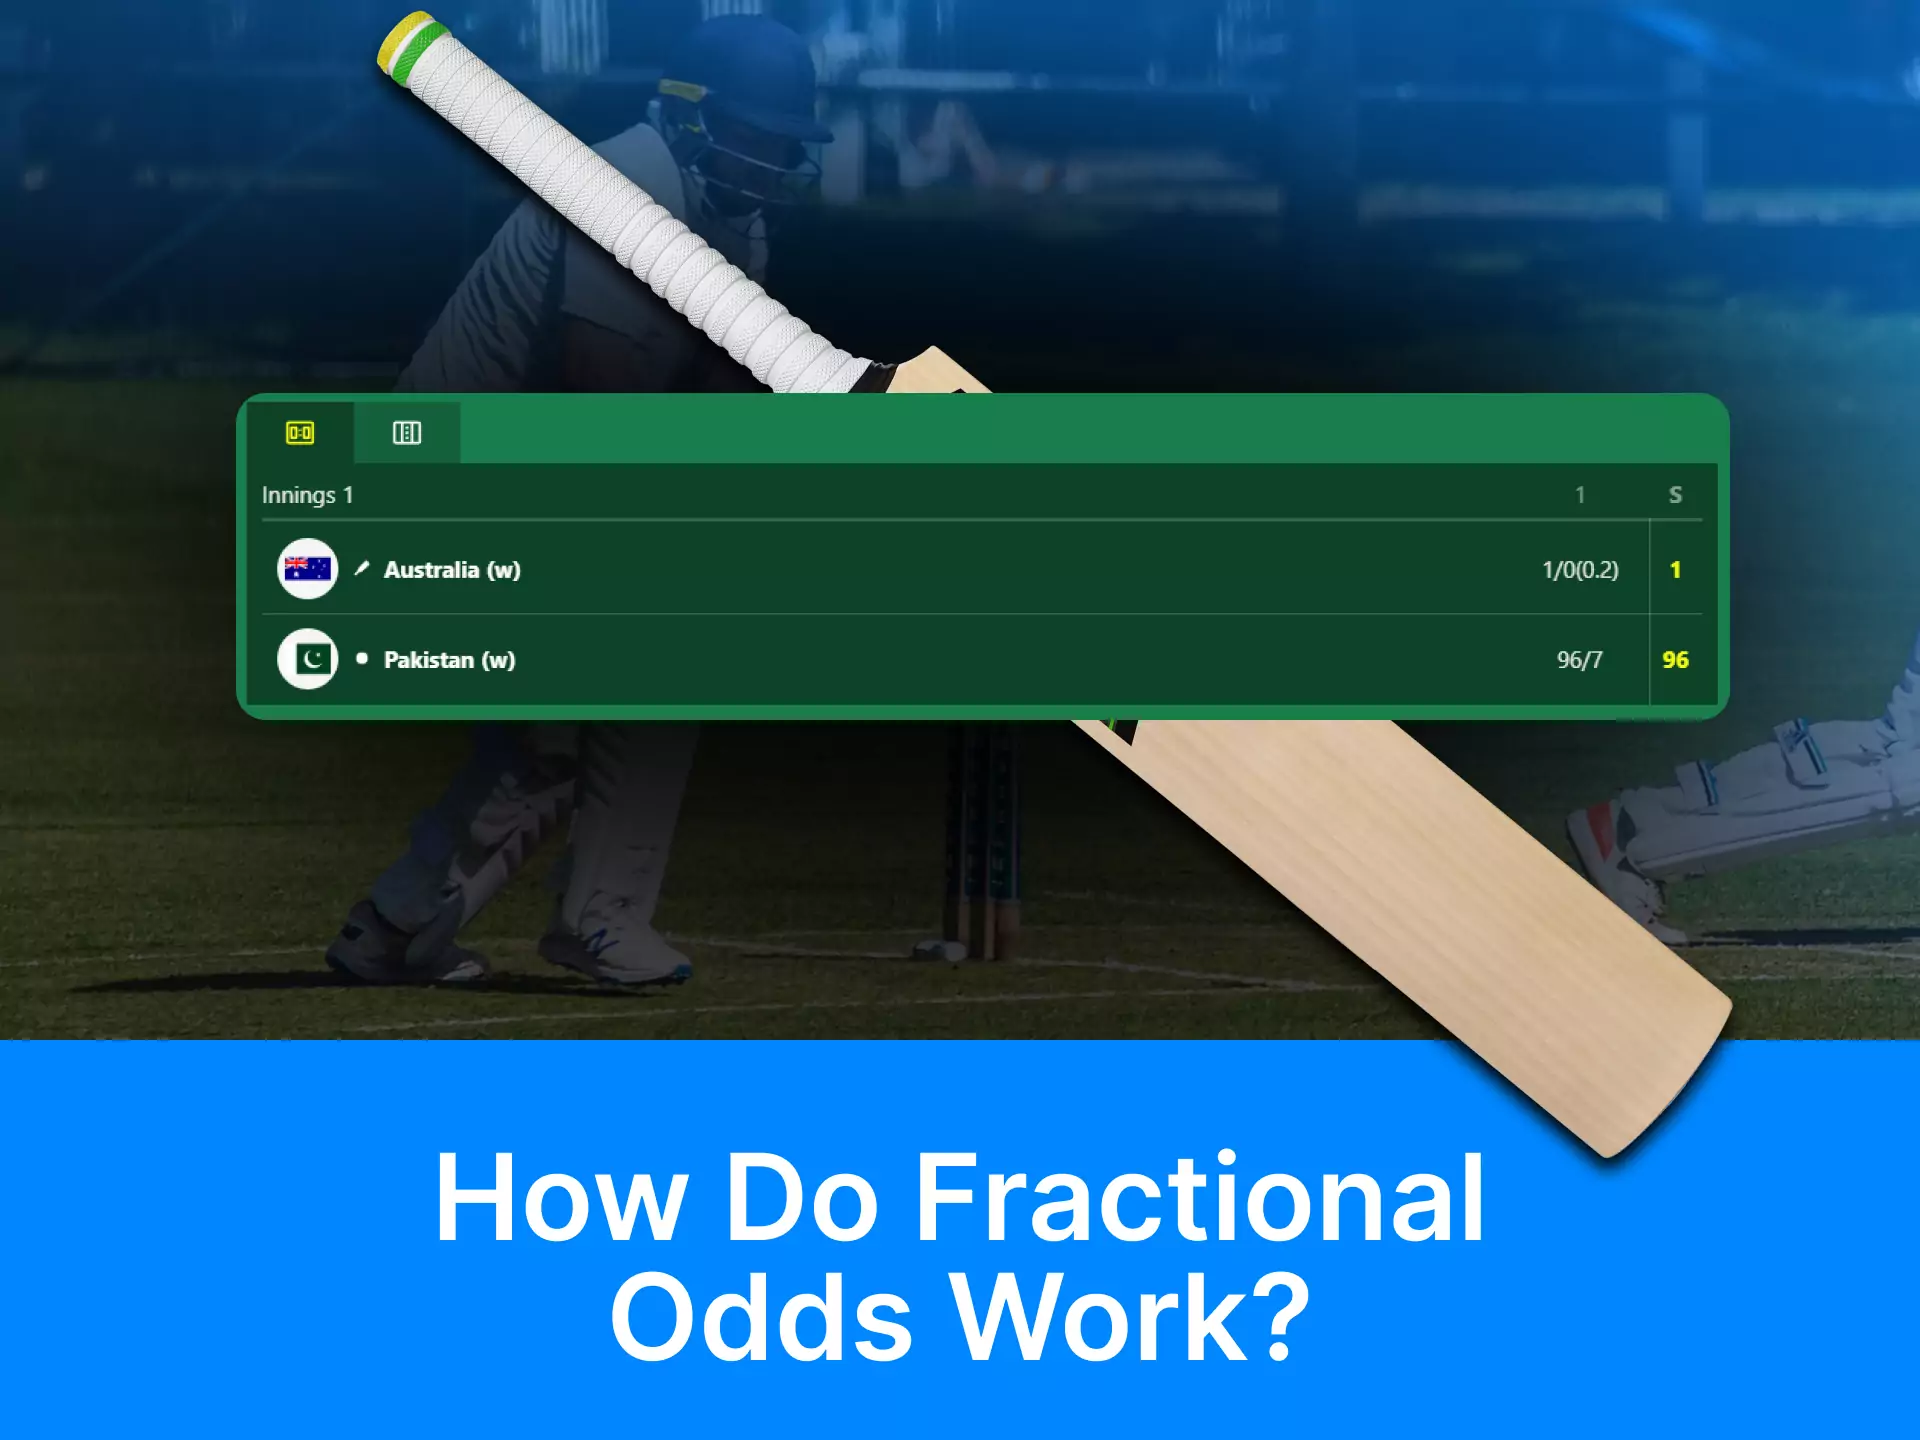 Learn more about fractional odds on bets.